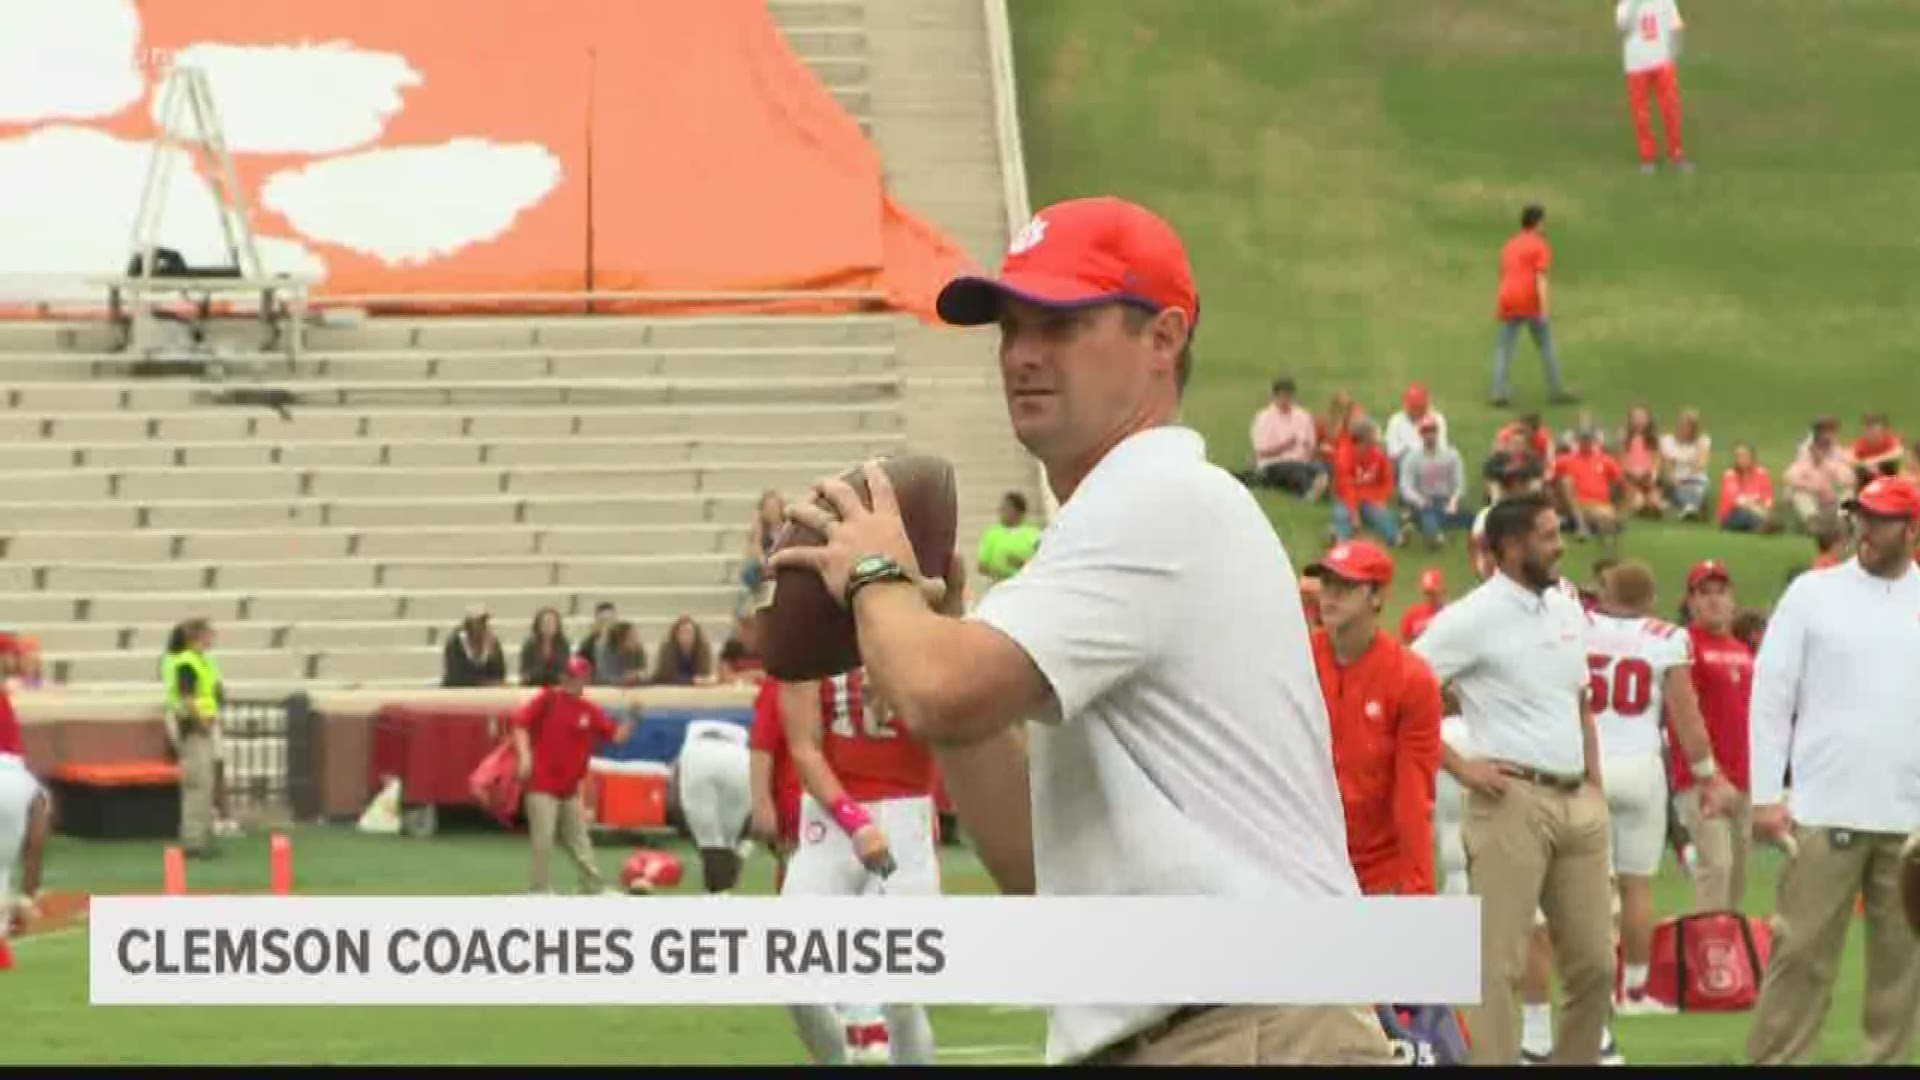 Clemson's offensive coordinators are now members of the $1 million club.